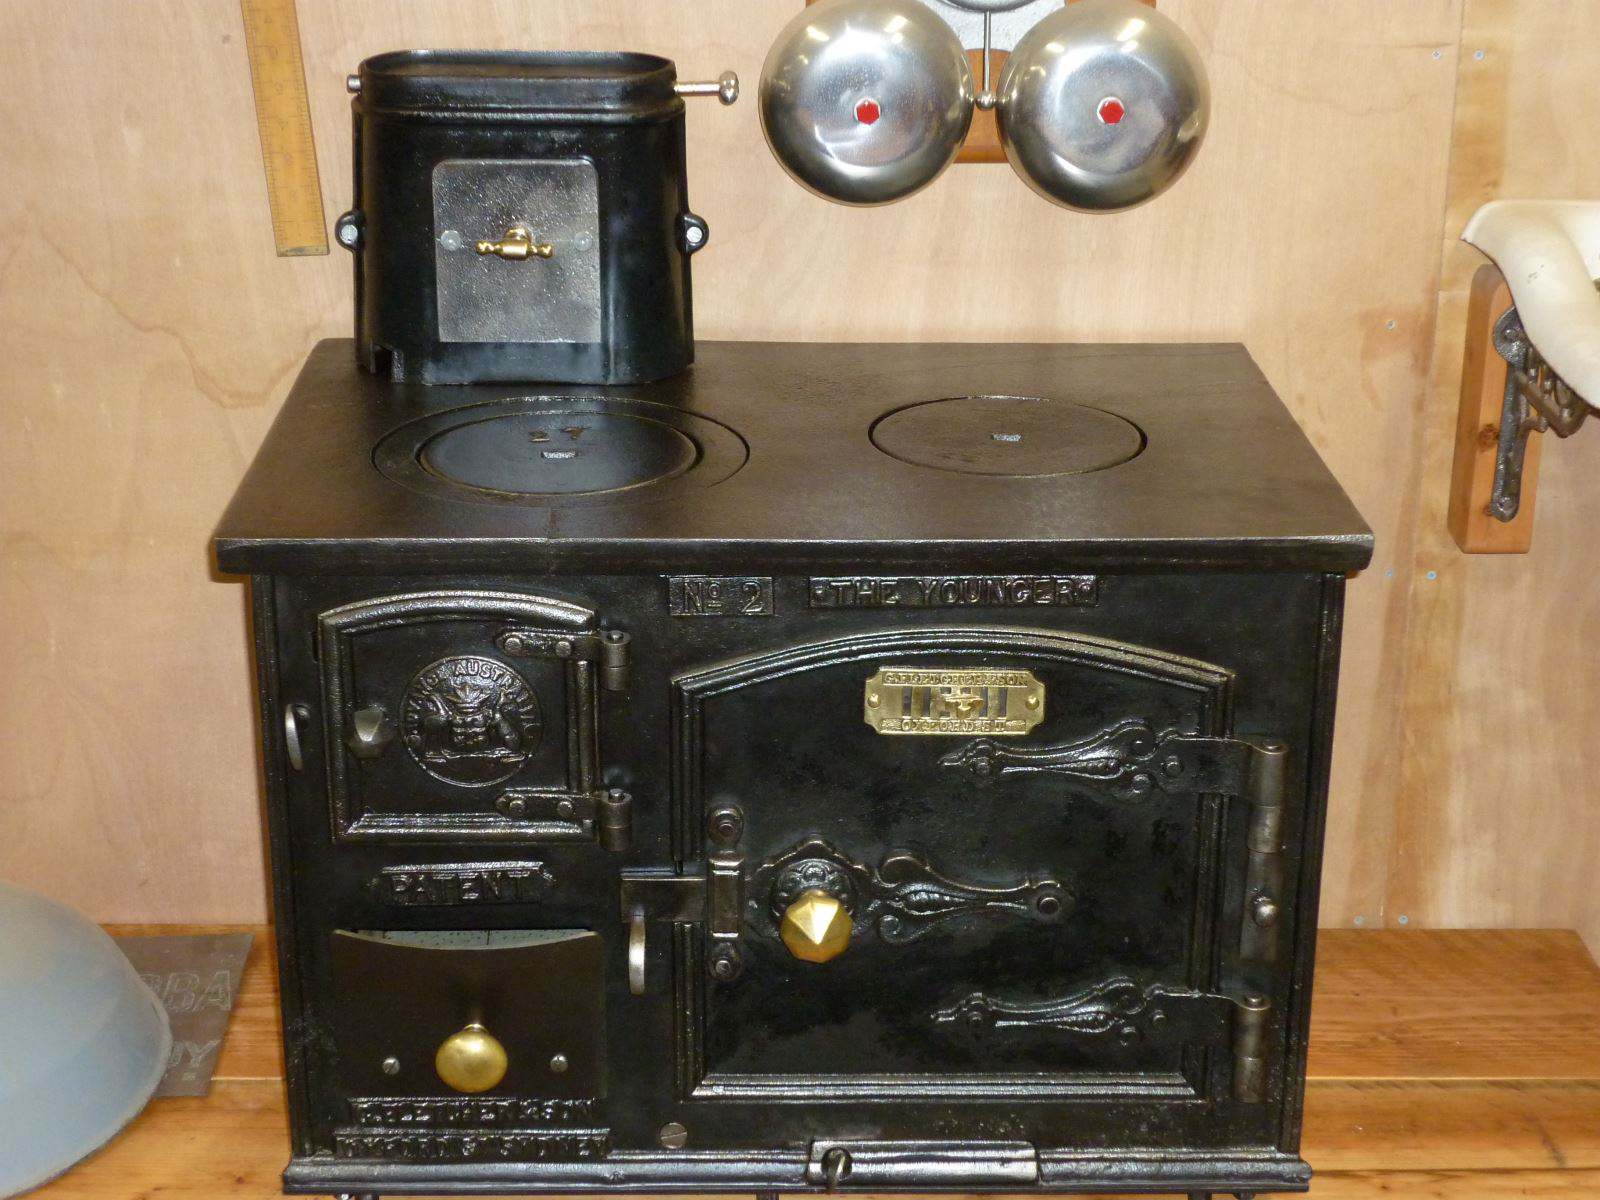 Fuel Stove Flecther & Sons Oxford Street Sydney.  Fully Restored